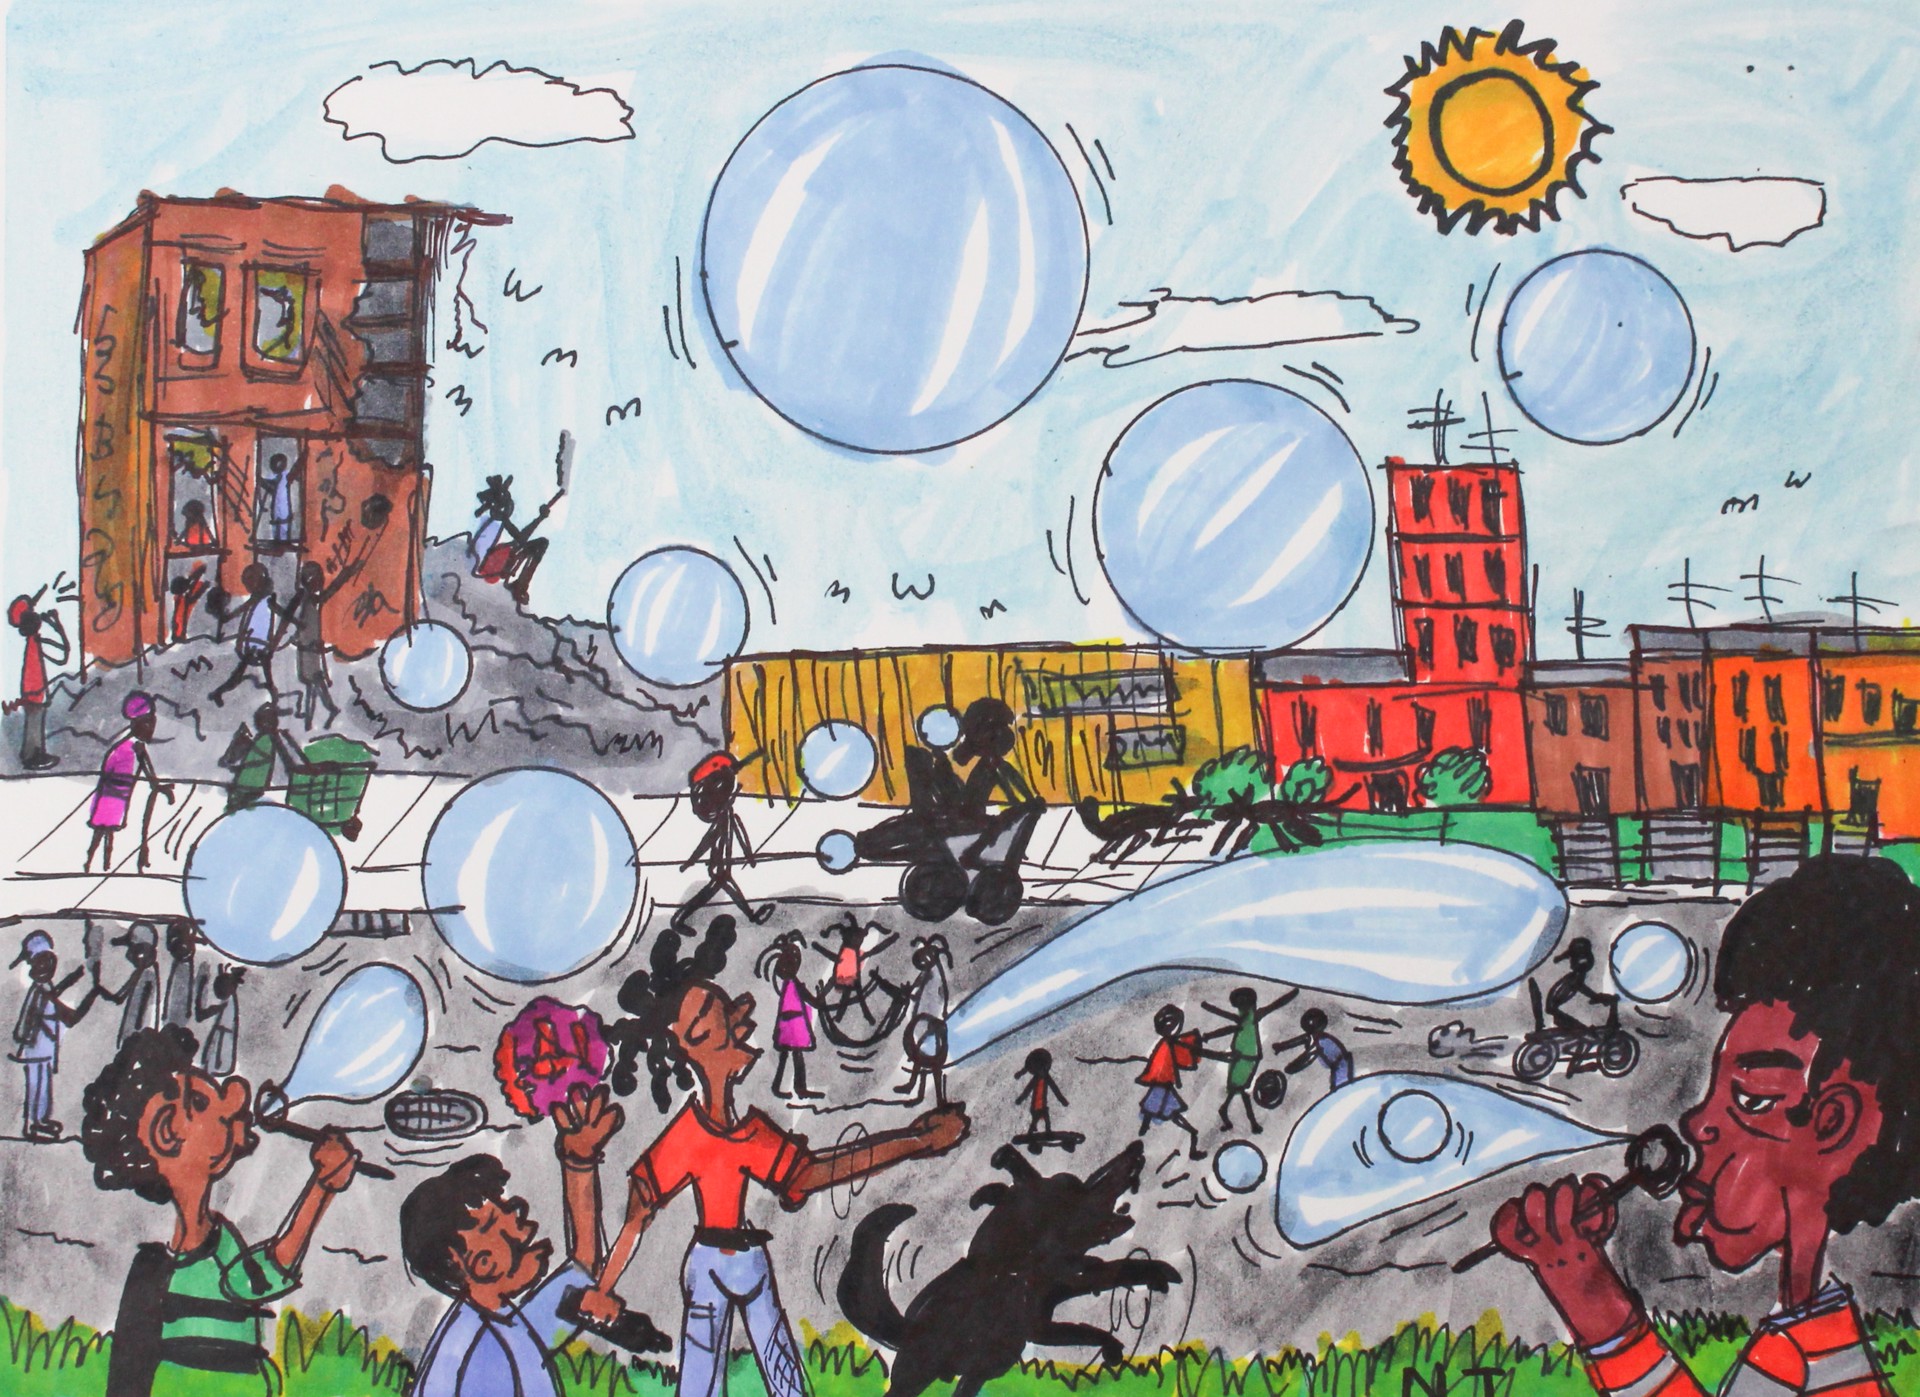 Blowing Bubbles in the Hood by Nonja Tiller